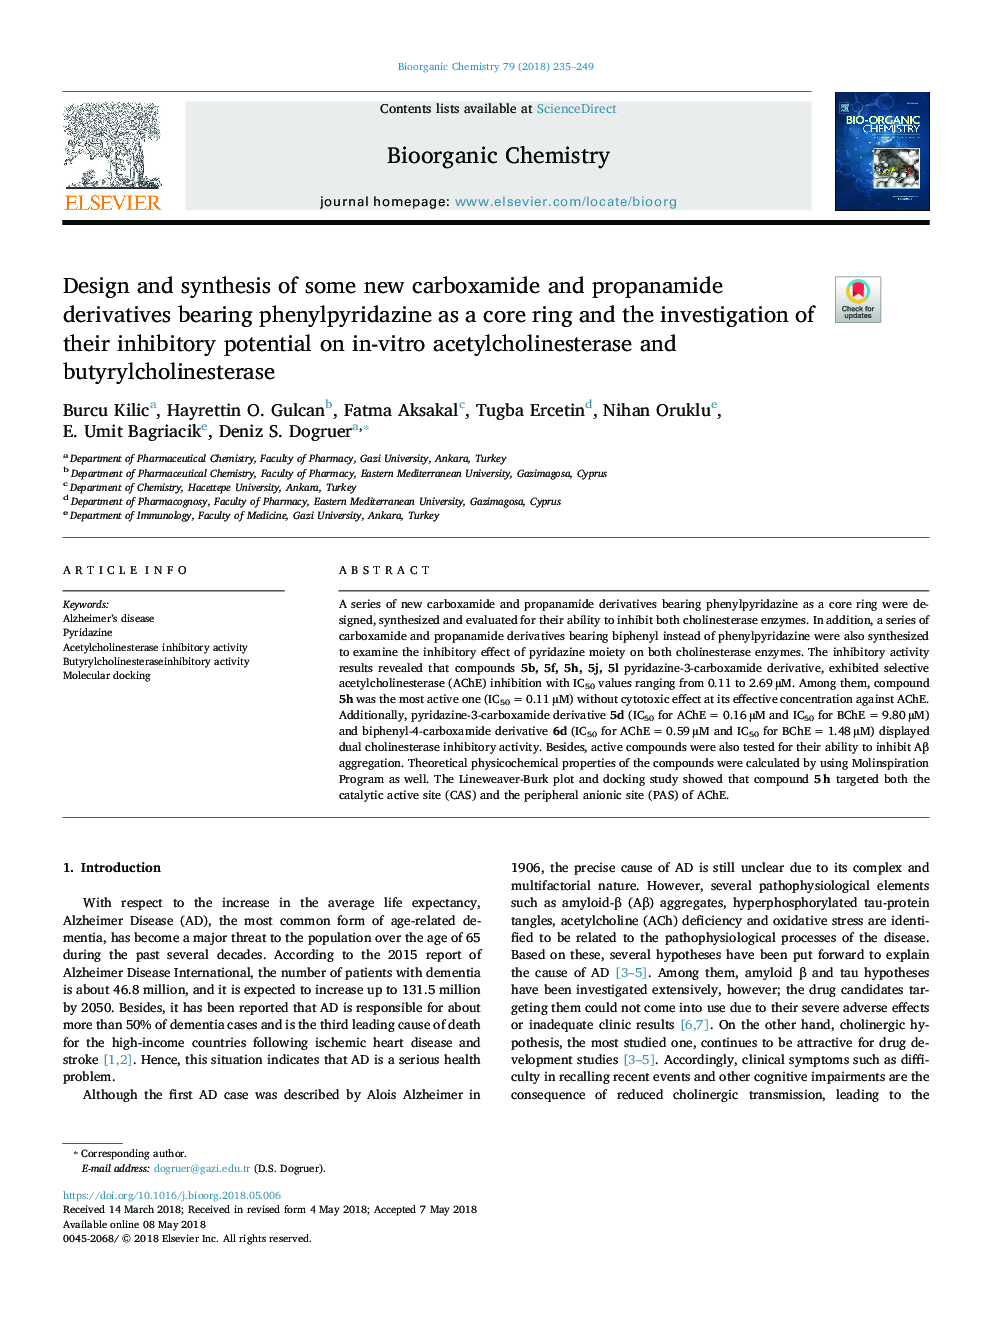 Design and synthesis of some new carboxamide and propanamide derivatives bearing phenylpyridazine as a core ring and the investigation of their inhibitory potential on in-vitro acetylcholinesterase and butyrylcholinesterase